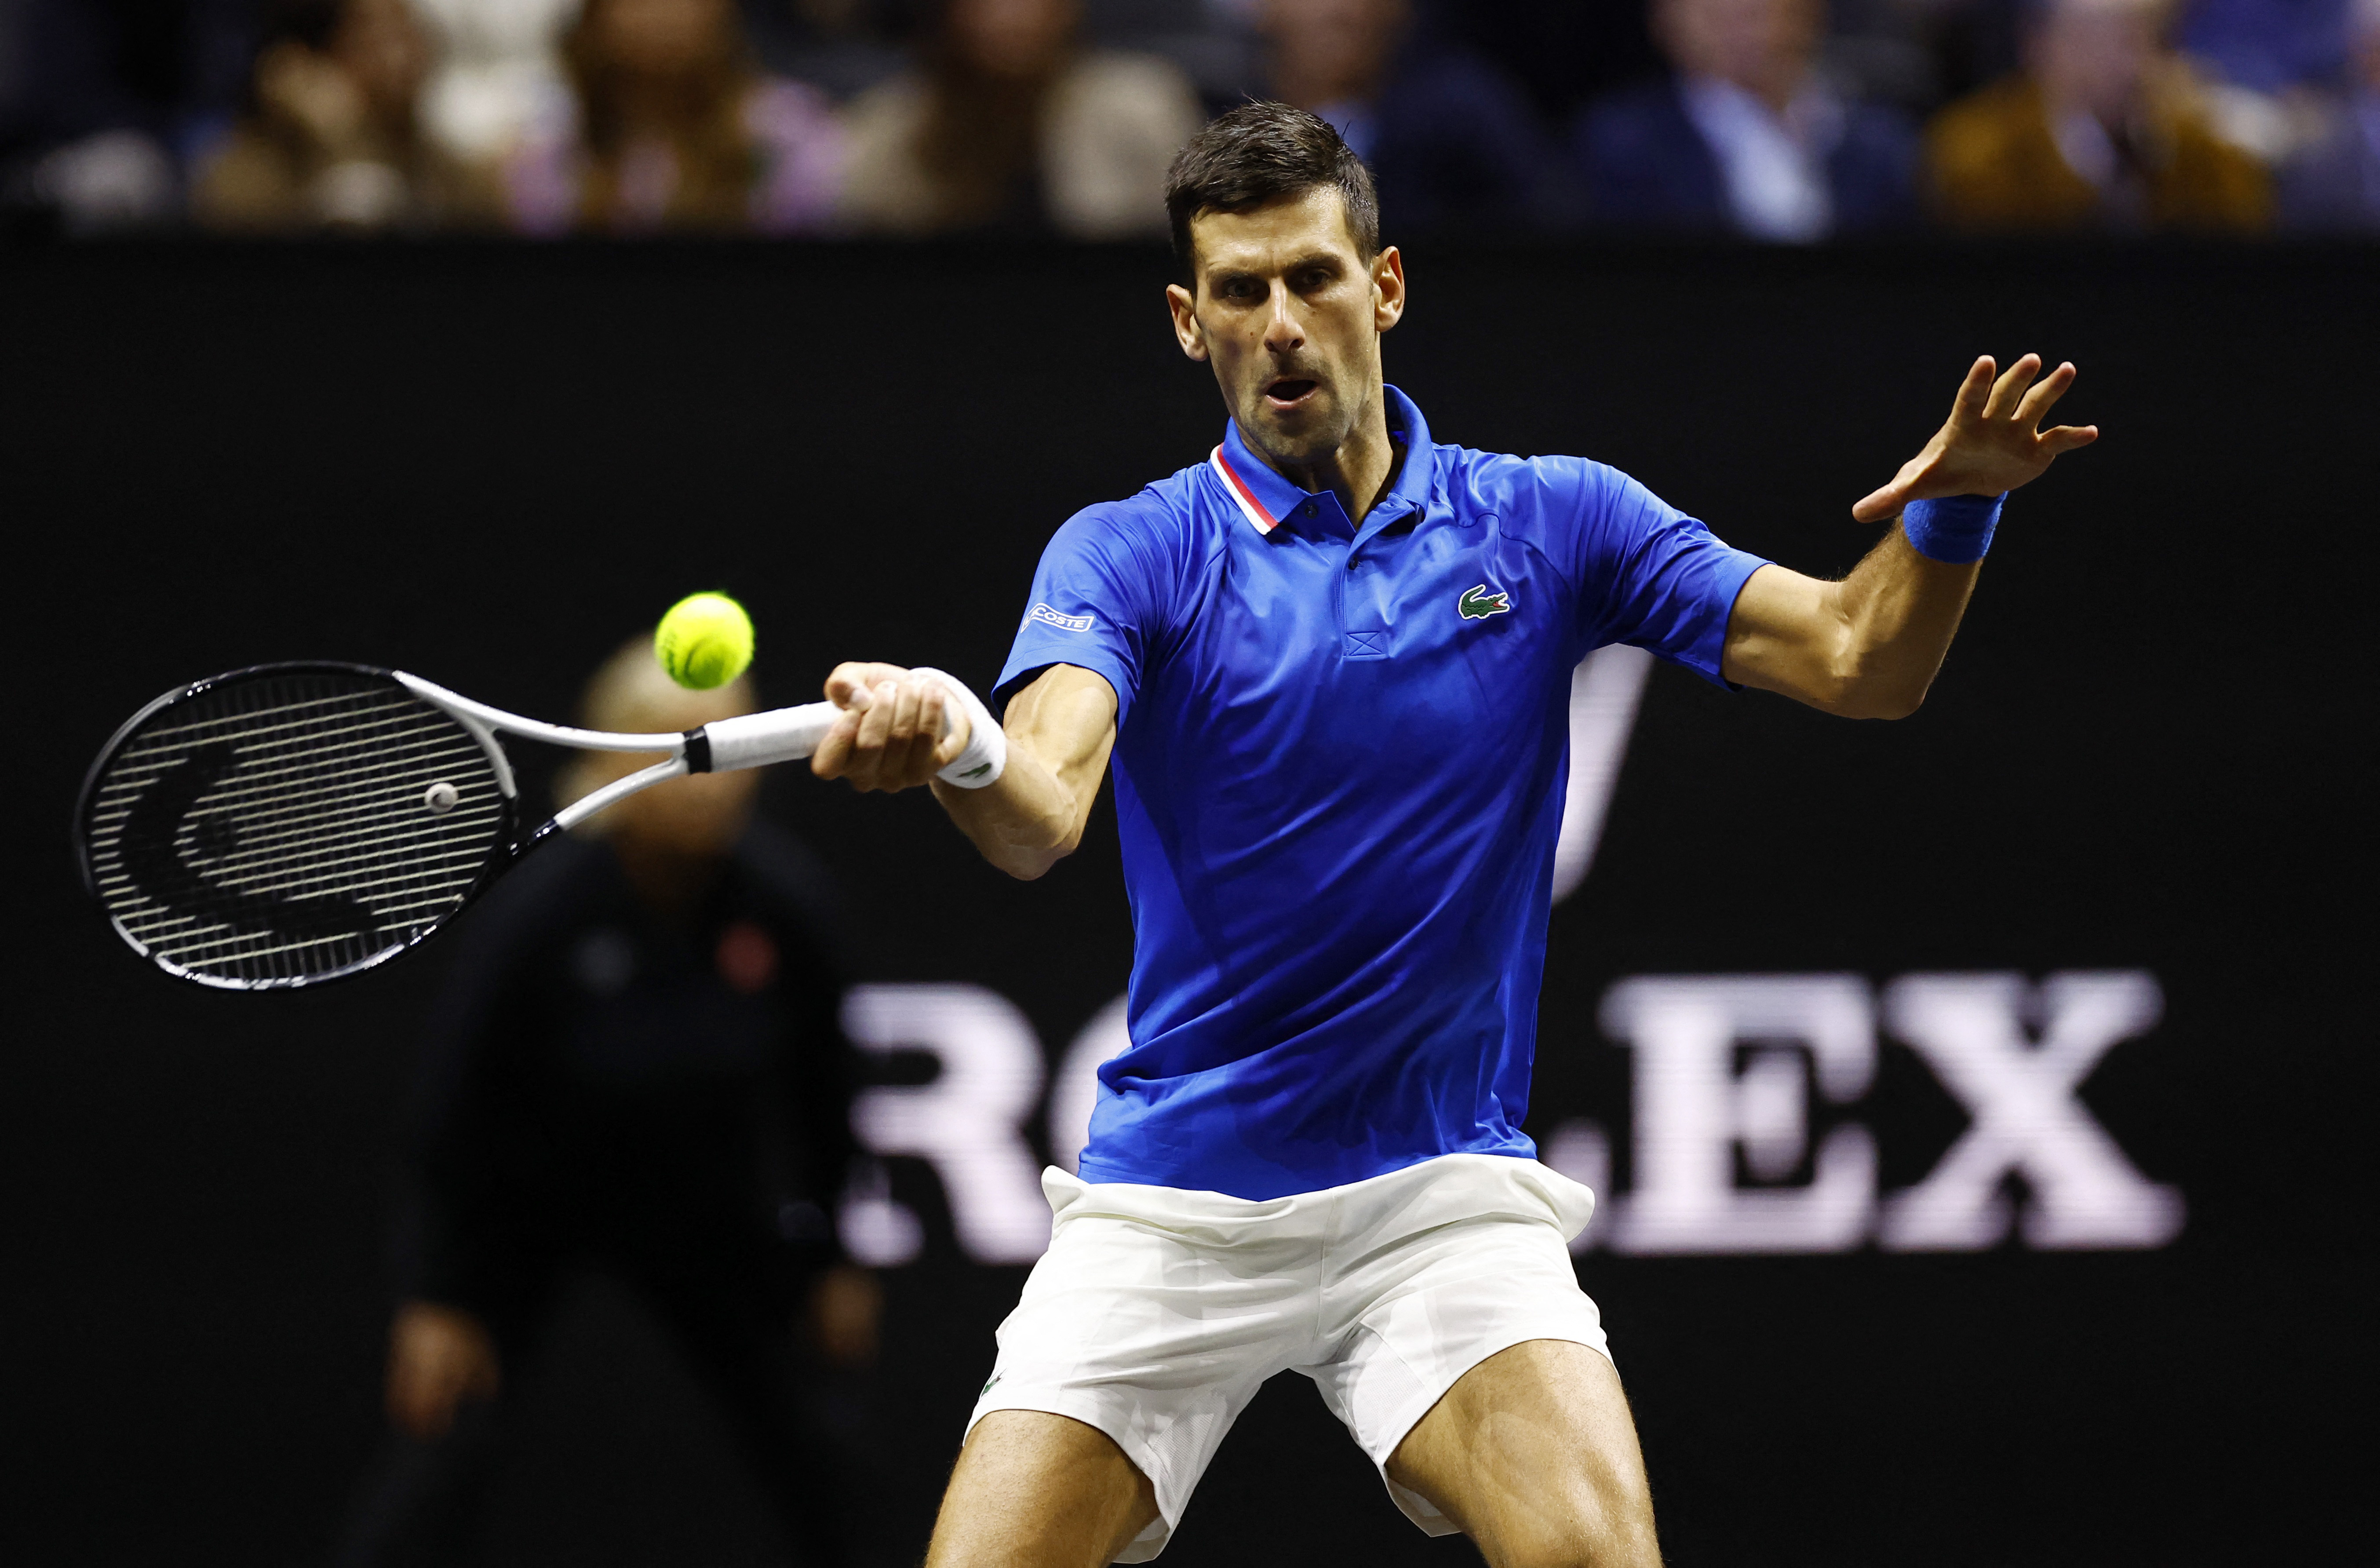 Djokovic dazzles on return to action at Laver Cup Reuters